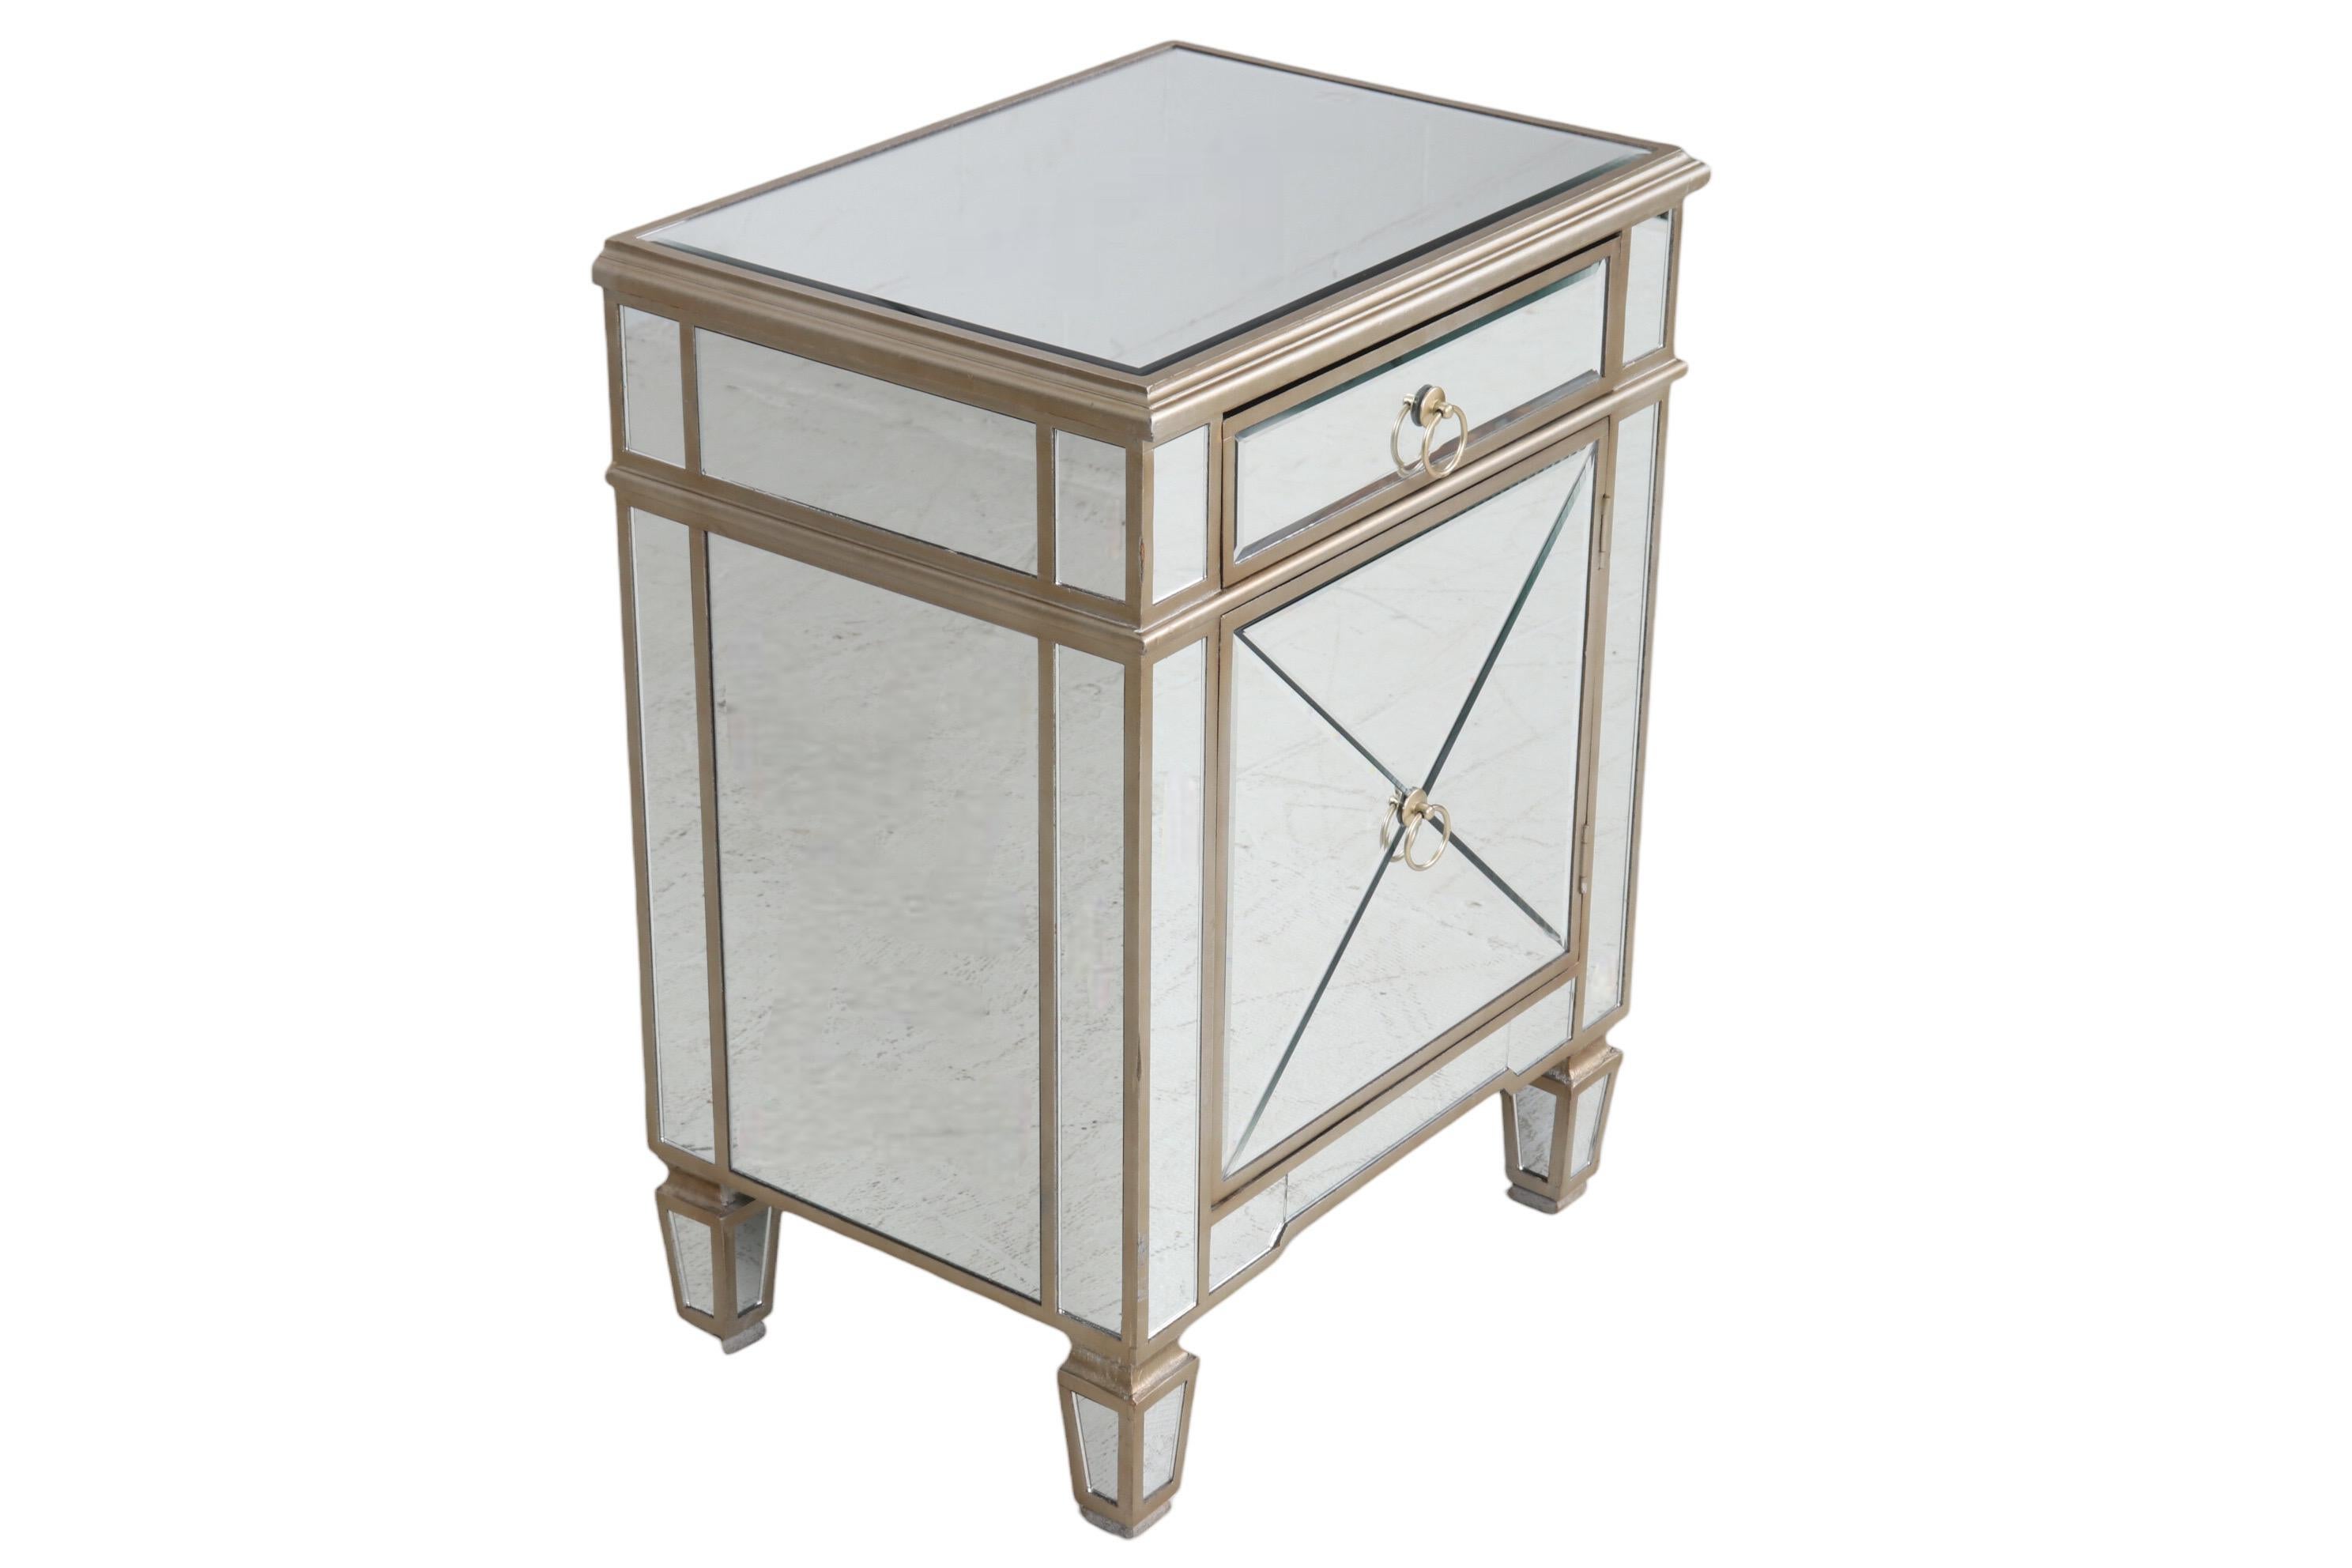 A Hollywood Regency mirrored cabinet, could be used as a nightstand or side table. Beveled mirrored glass panels cover each surface, framed with wood in a champagne finish. A single drawer and cabinet below open with round loop handles. Stands on